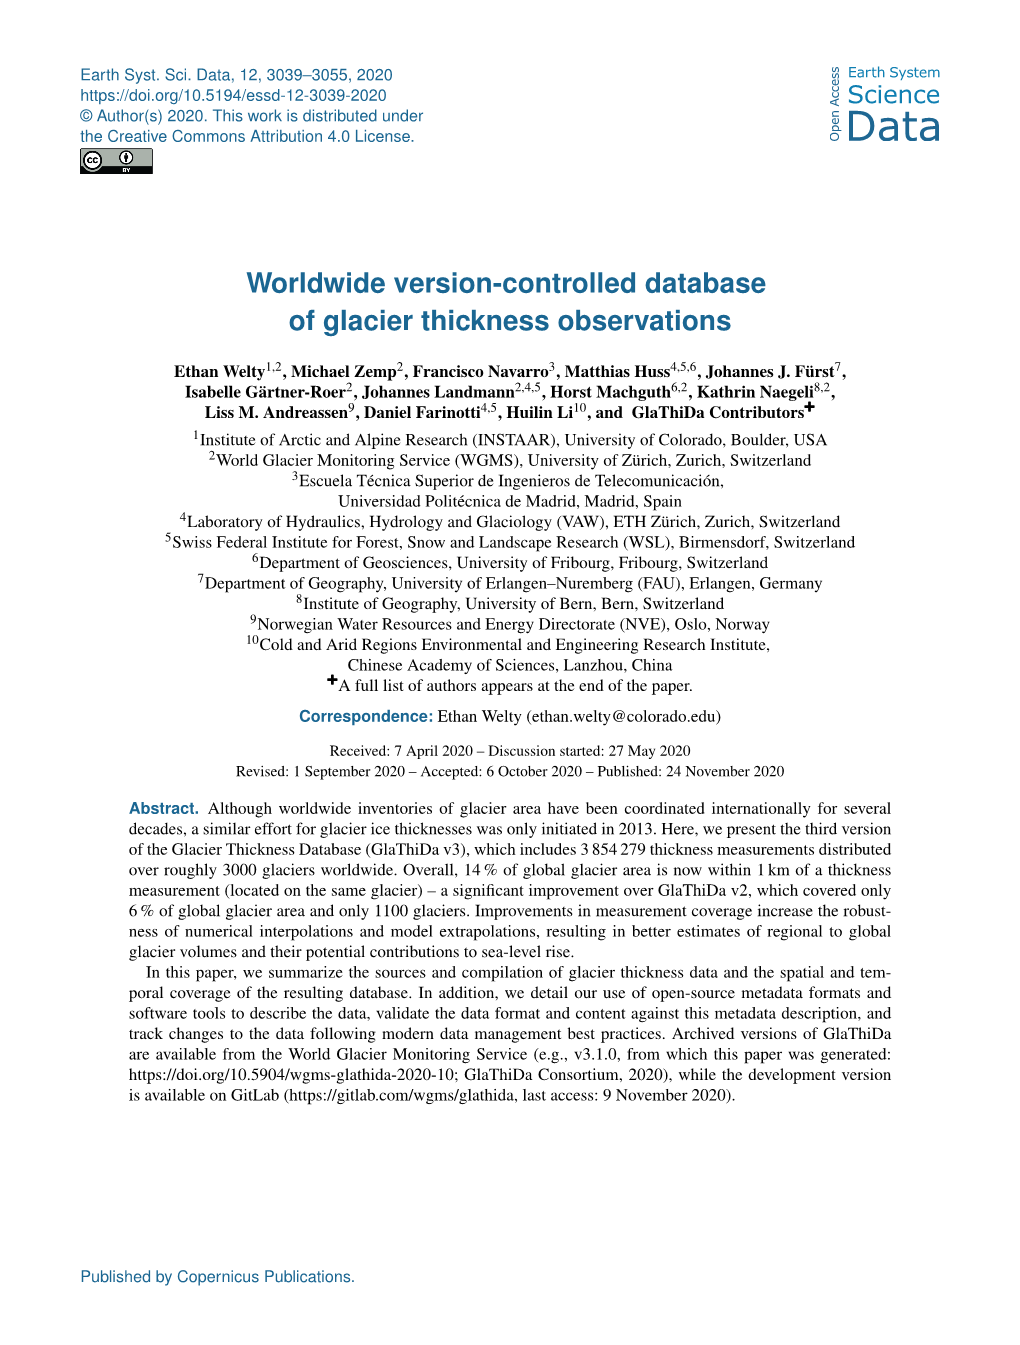 Worldwide Version-Controlled Database of Glacier Thickness Observations